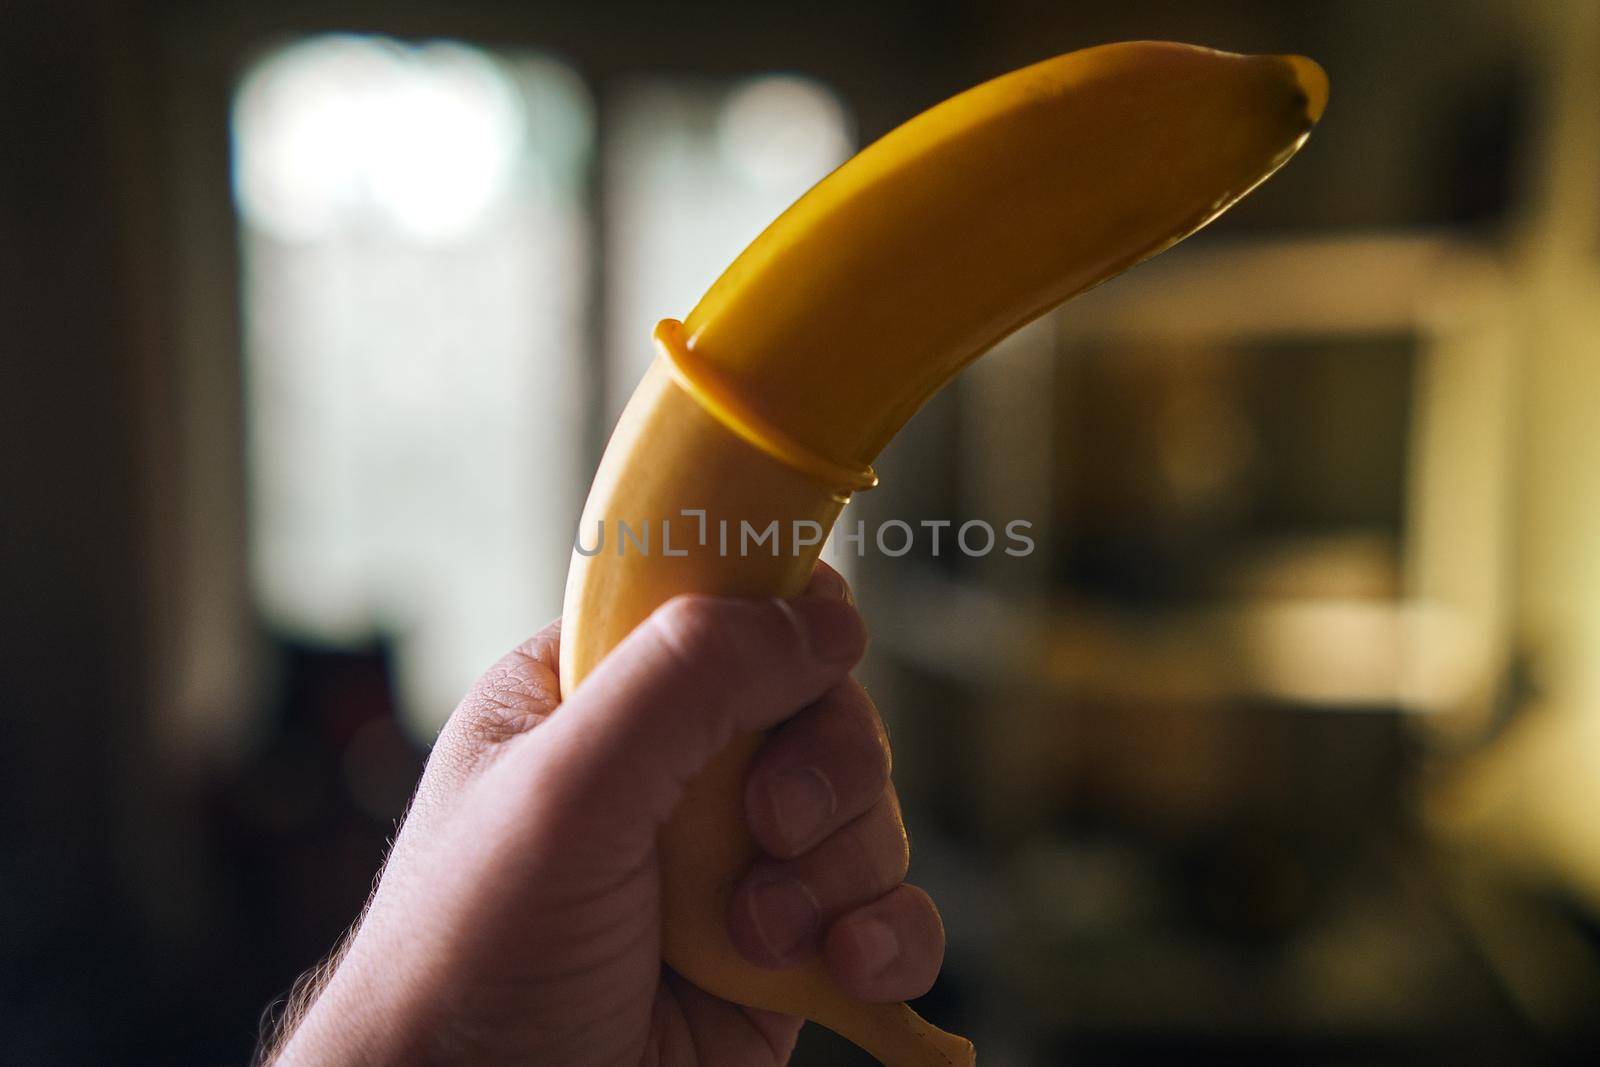 Yellow Condom and yellow banana holding a male hand indoors